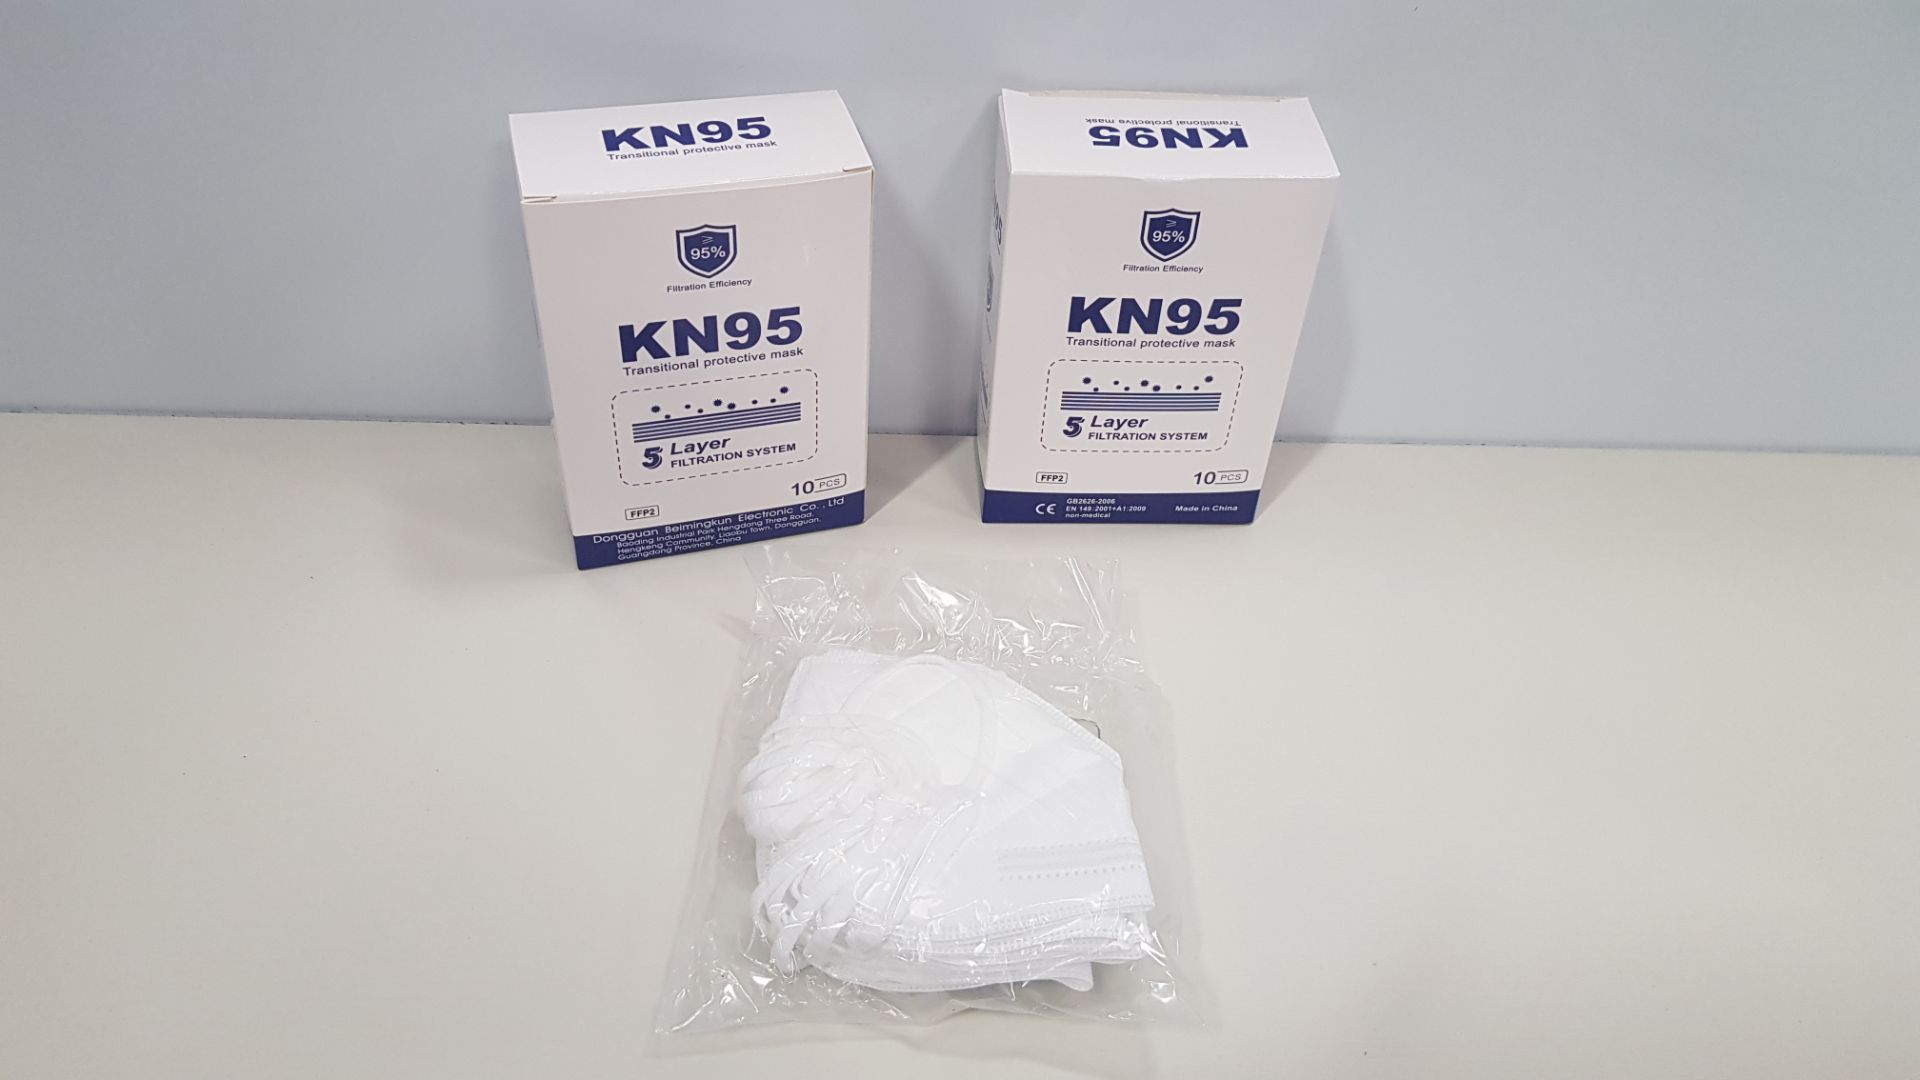 200 X BRAND NEW DR MFYAN KN95 THREE DIMENSIONAL PROTECTIVE MASK 3 YEAR SHELF LIFE (UNOPENED) PRODUCT